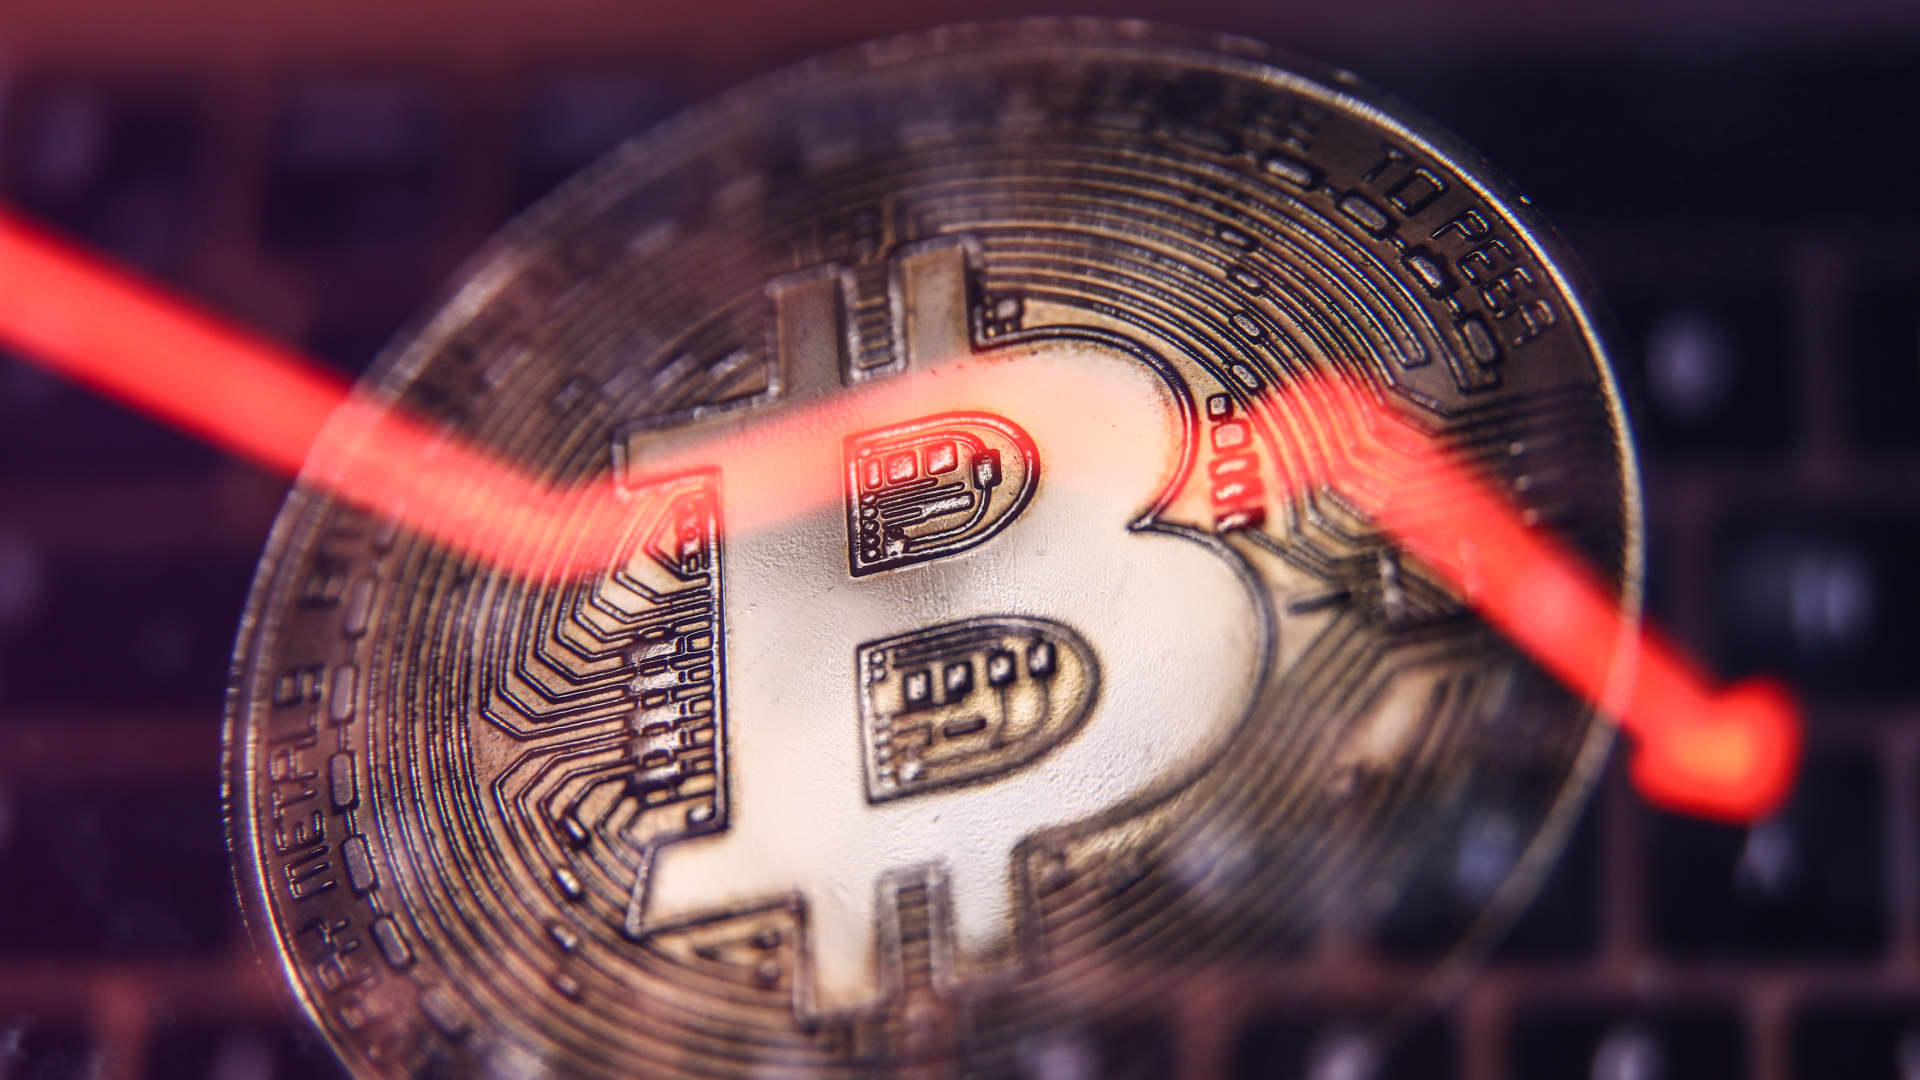 Bitcoin briefly drops below $20,000 again as pressure continues to mount on crypto market